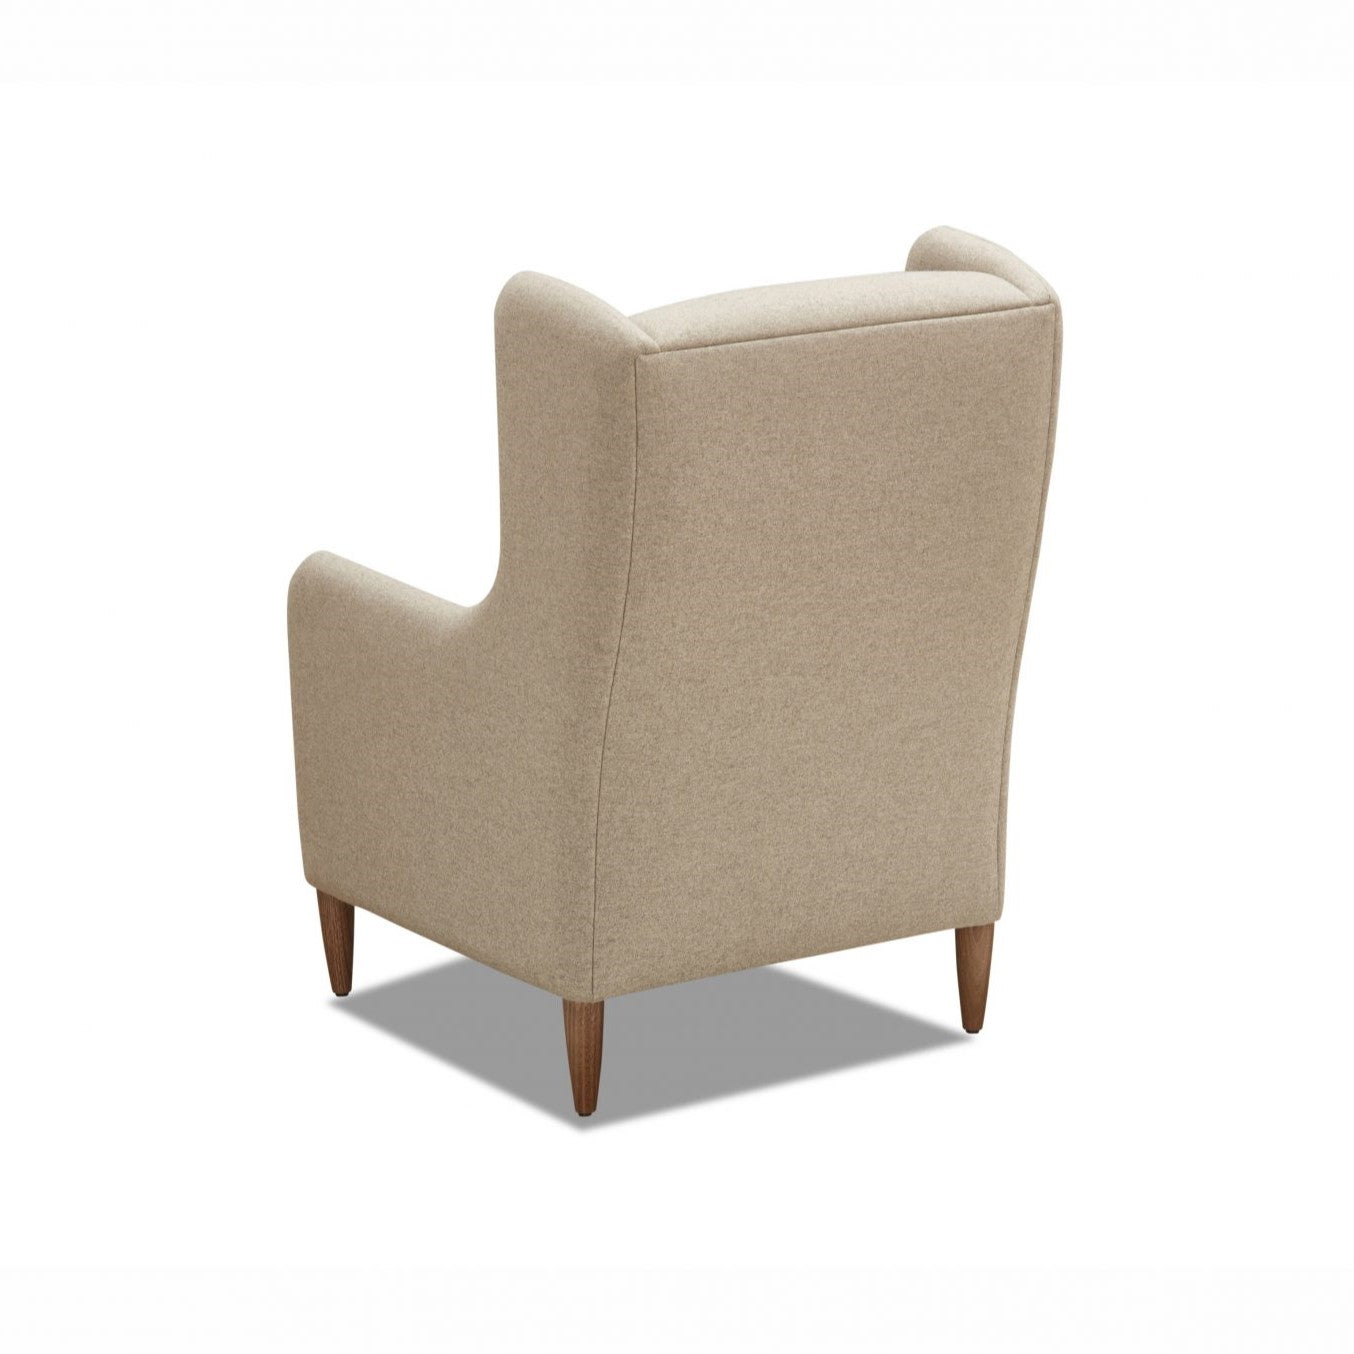 Heathrow Occasional Chair by Molmic available from Make Your House A Home, Furniture Store located in Bendigo, Victoria. Australian Made in Melbourne.